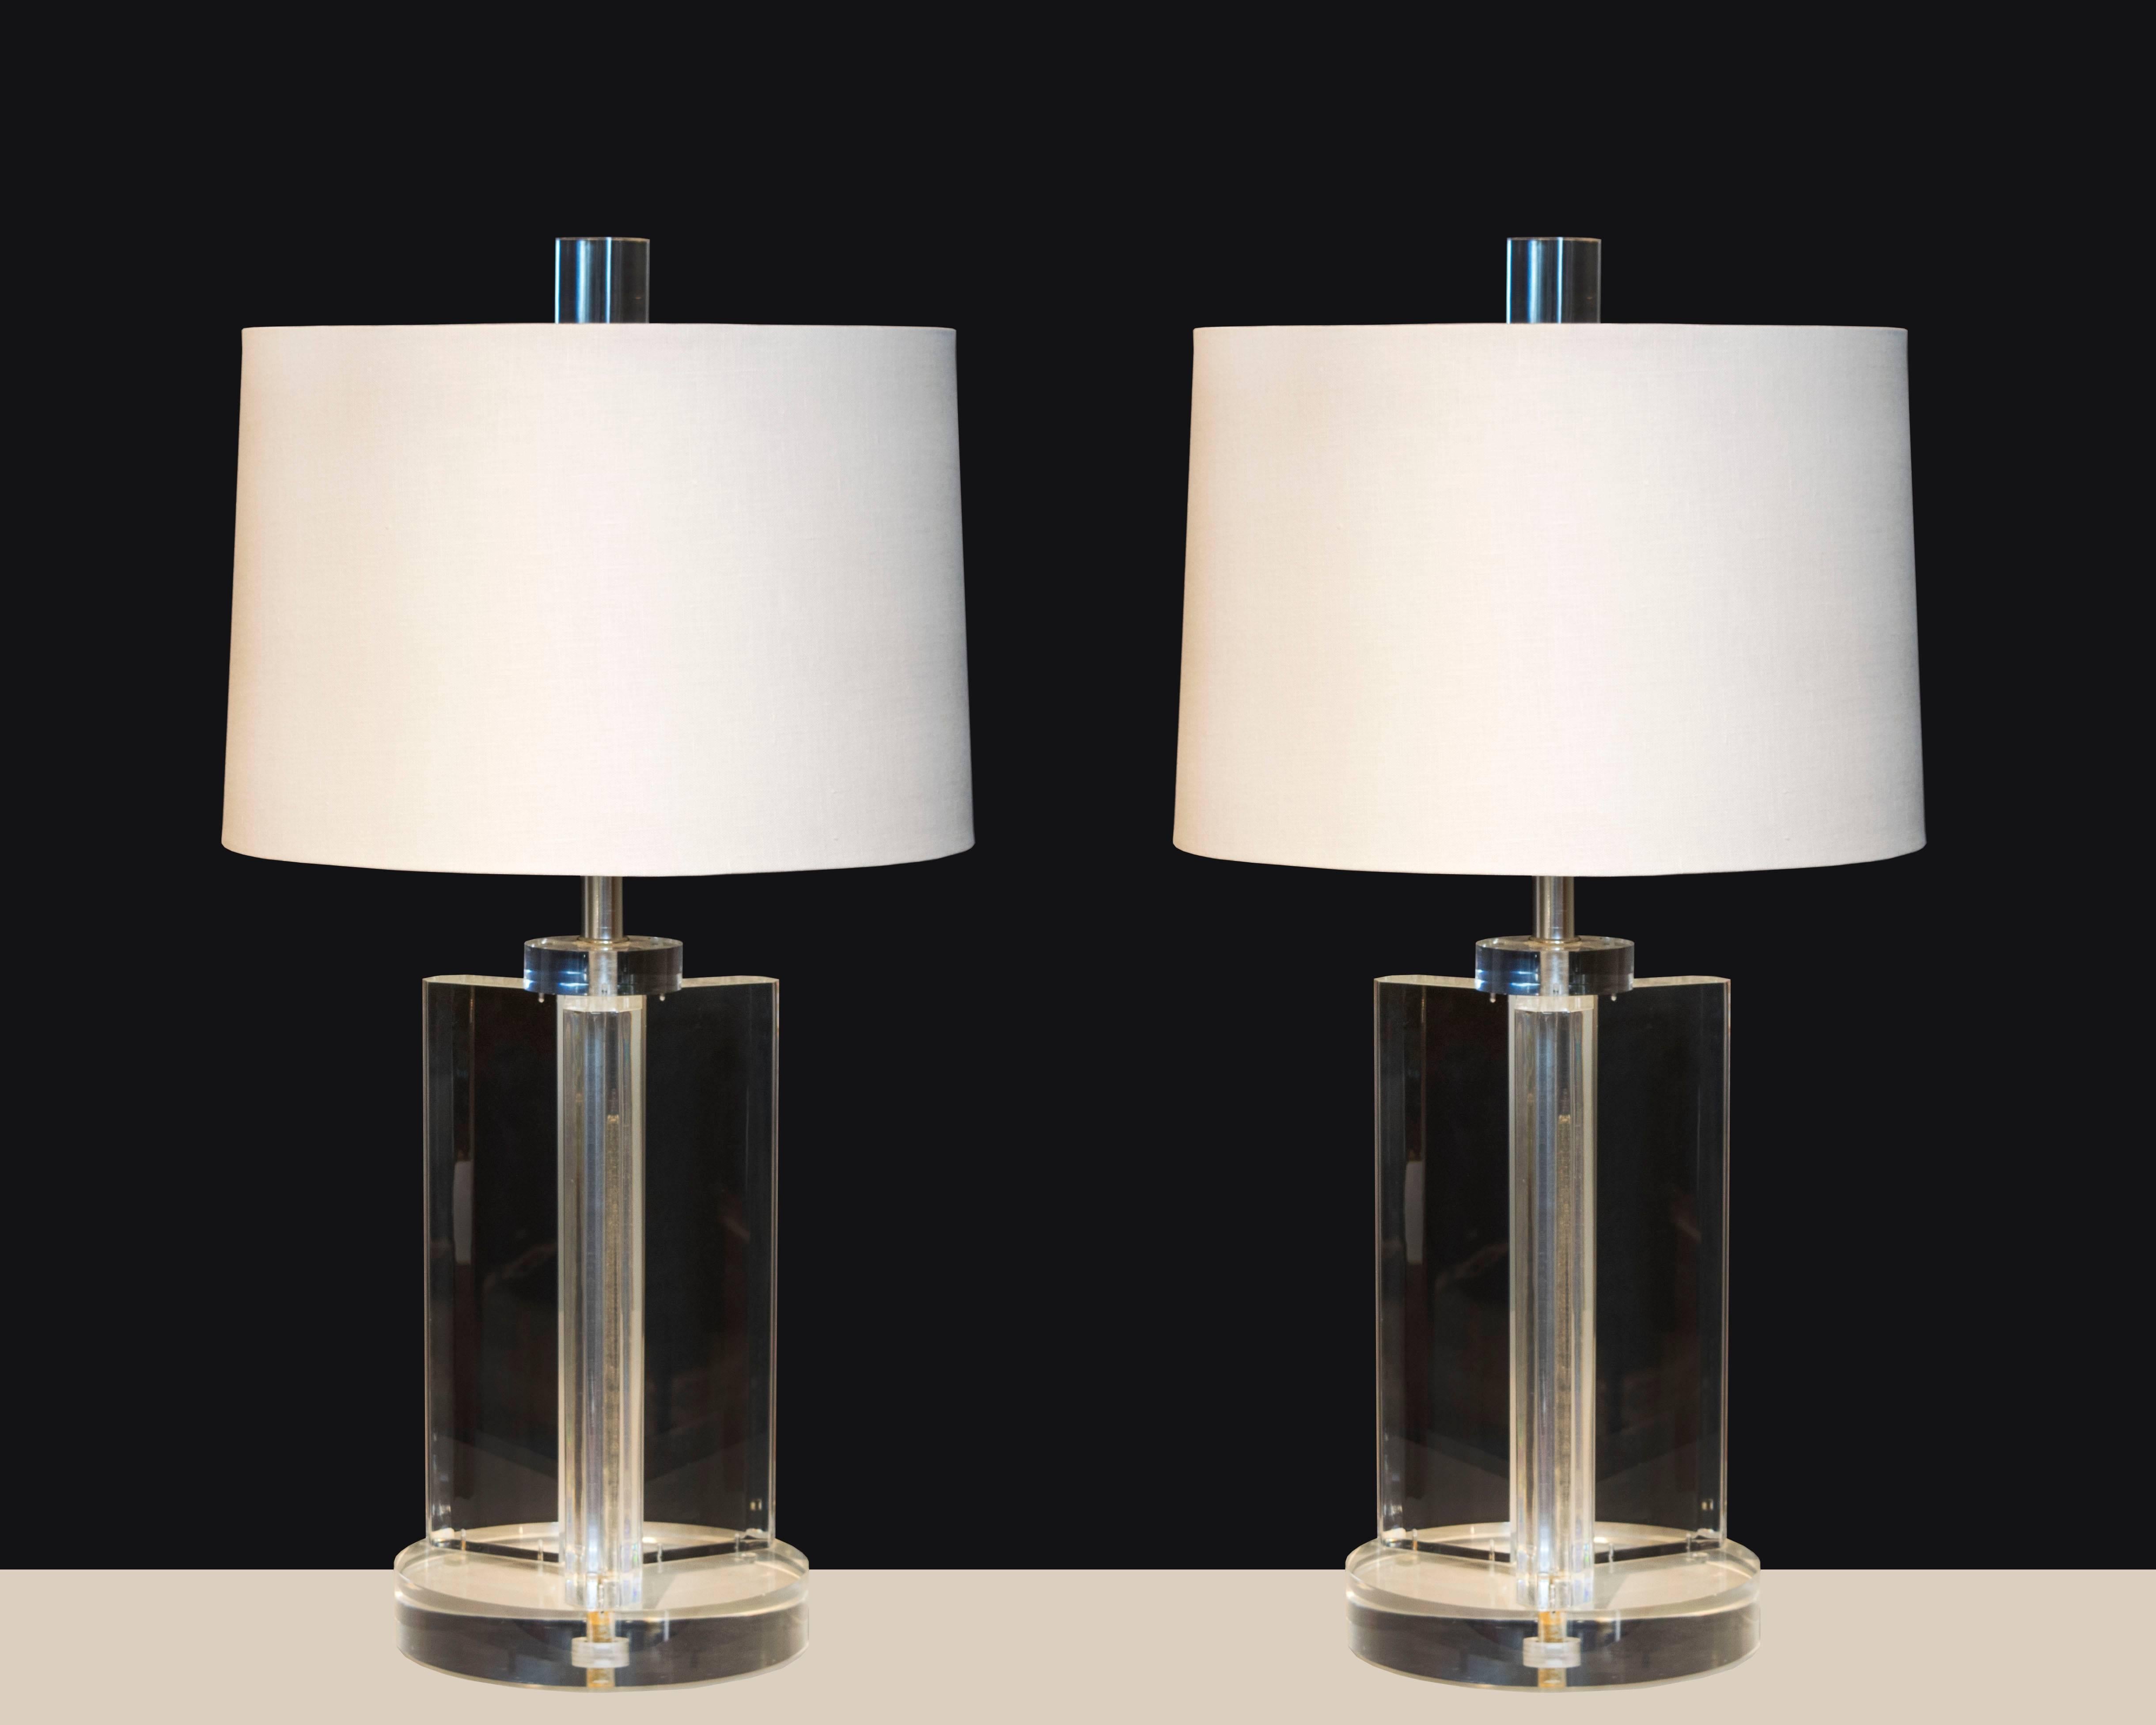 Absolutely stunning pair of Lucite lamps with a Y-shaped column sitting on top of a circular base with oversized matching finials. These lamps are not signed but they are some of the best constructed vintage Lucite lamps we've seen yet.